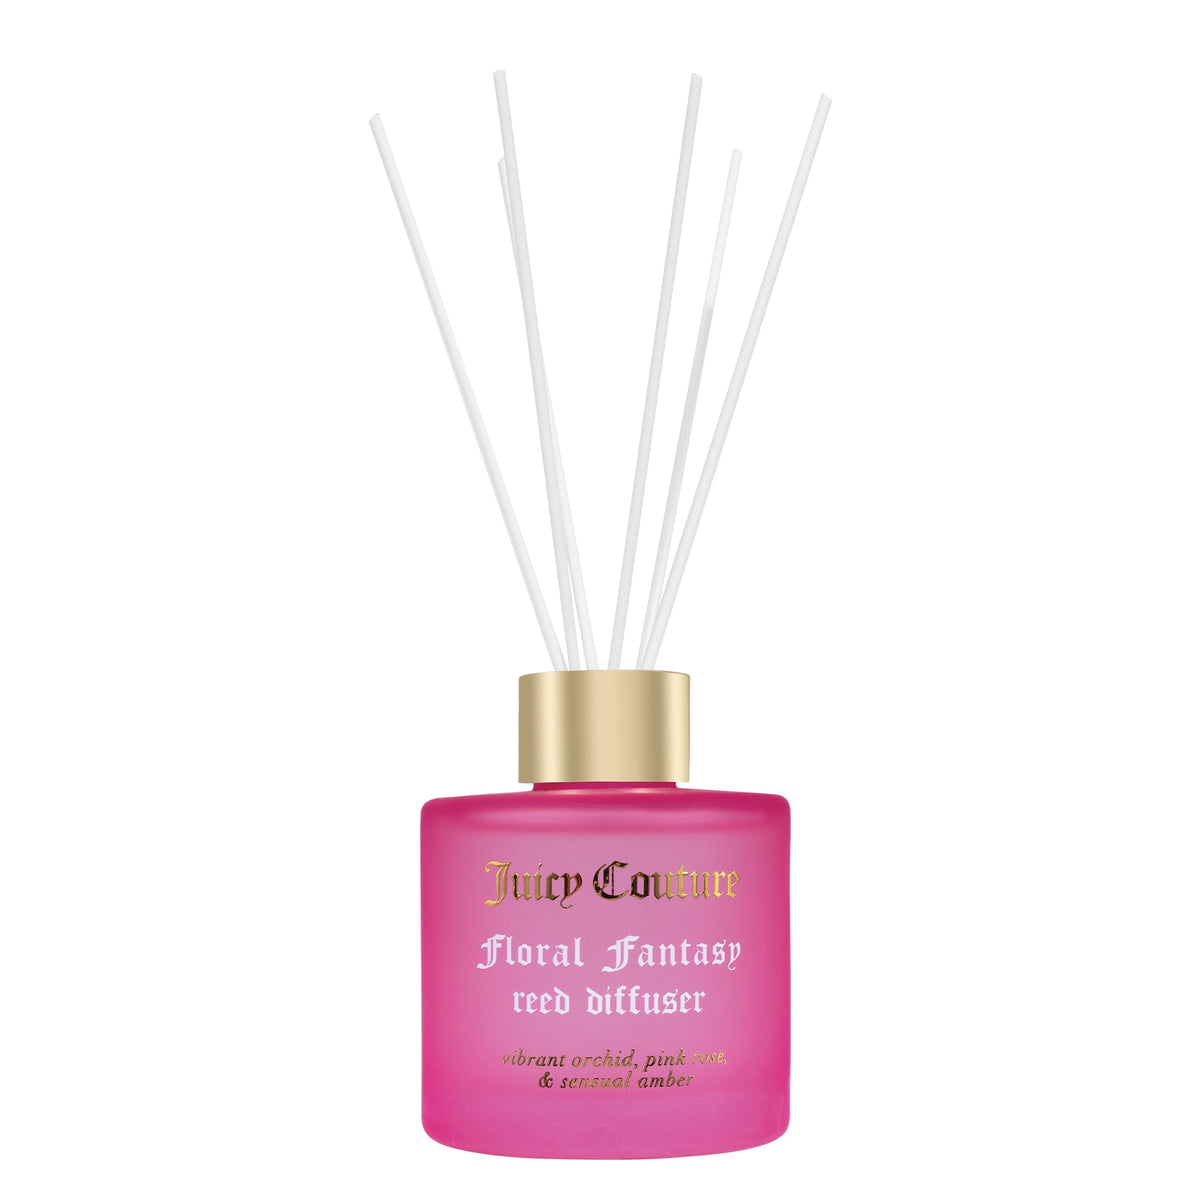 Juicy Couture Floral Fantasy Reed Diffuser